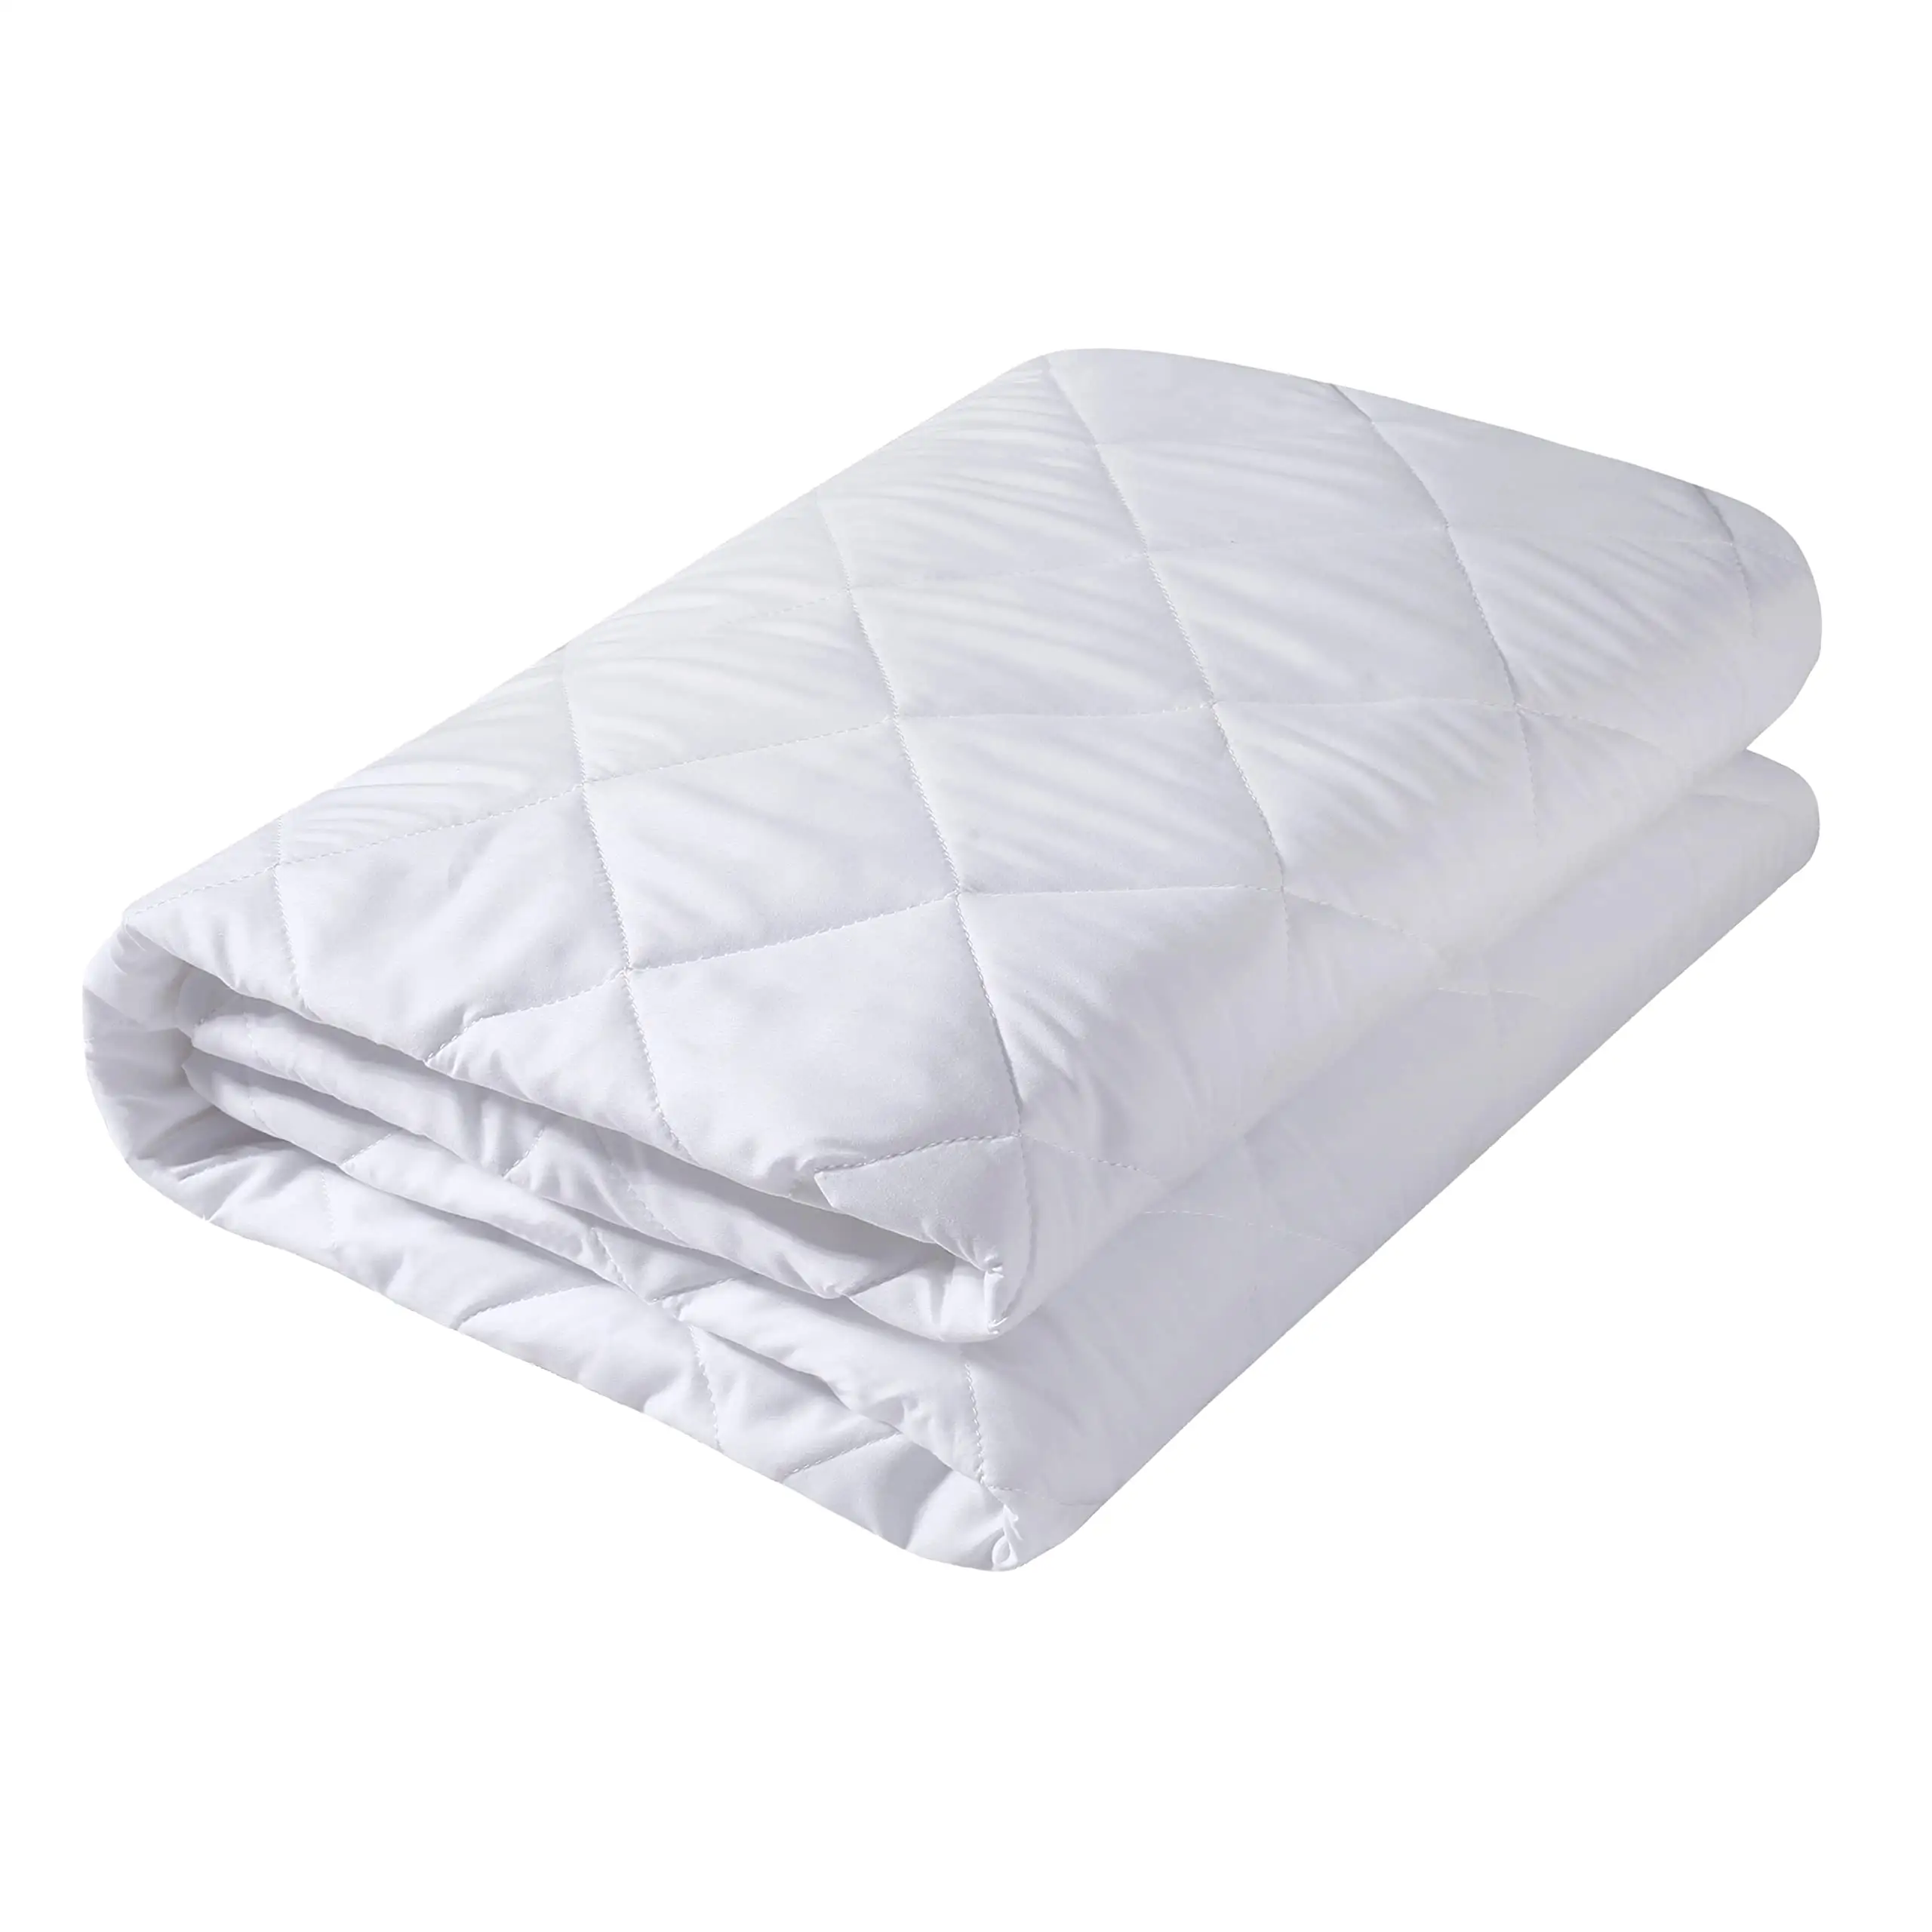 waterproof customized hotel quality waterproof mattress protector waterproof mattress cover for hotel and home